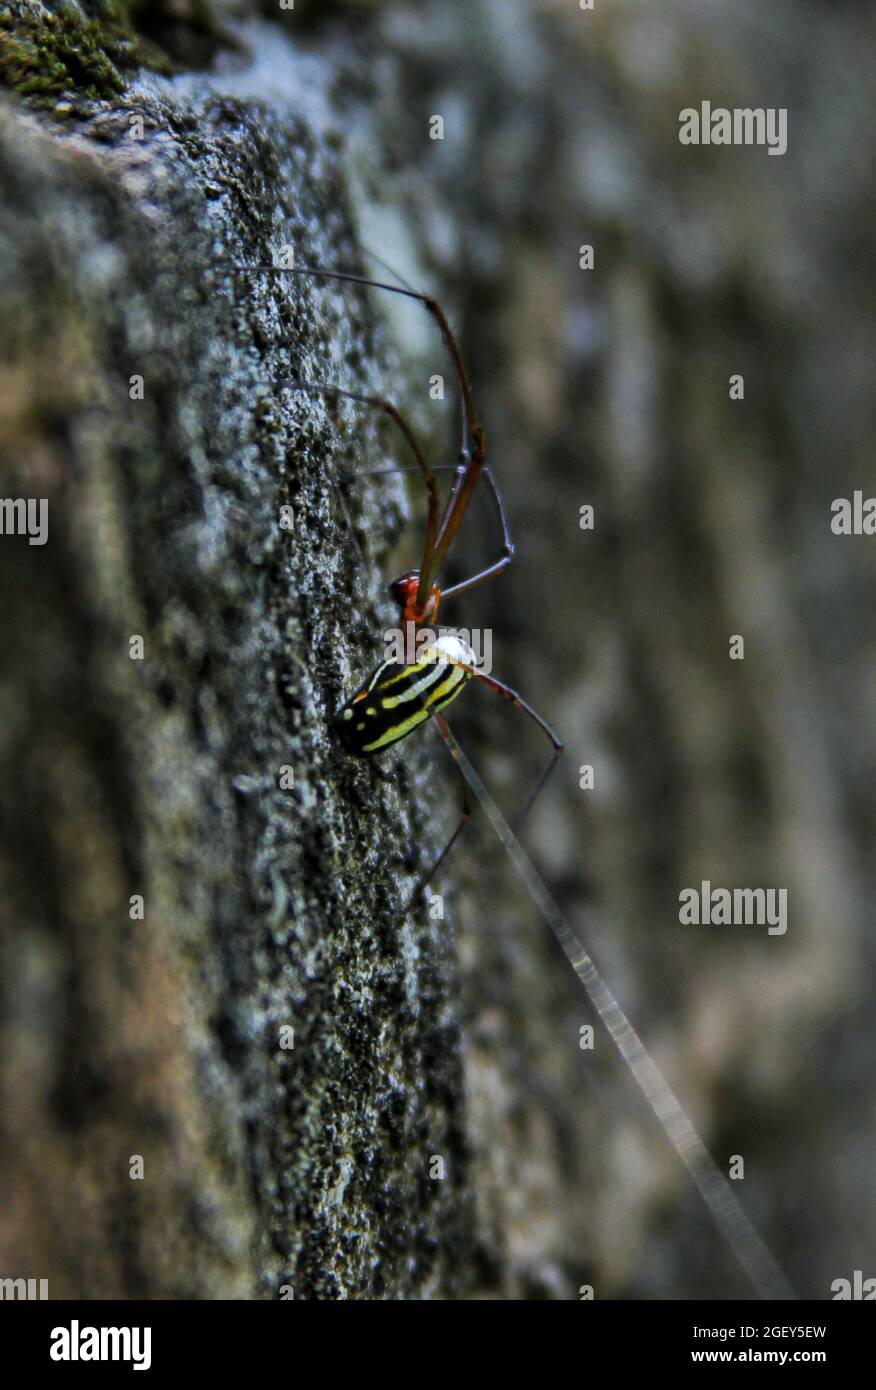 A selective of Leucauge decorata, the decorative silver orb spider on the stone Stock Photo